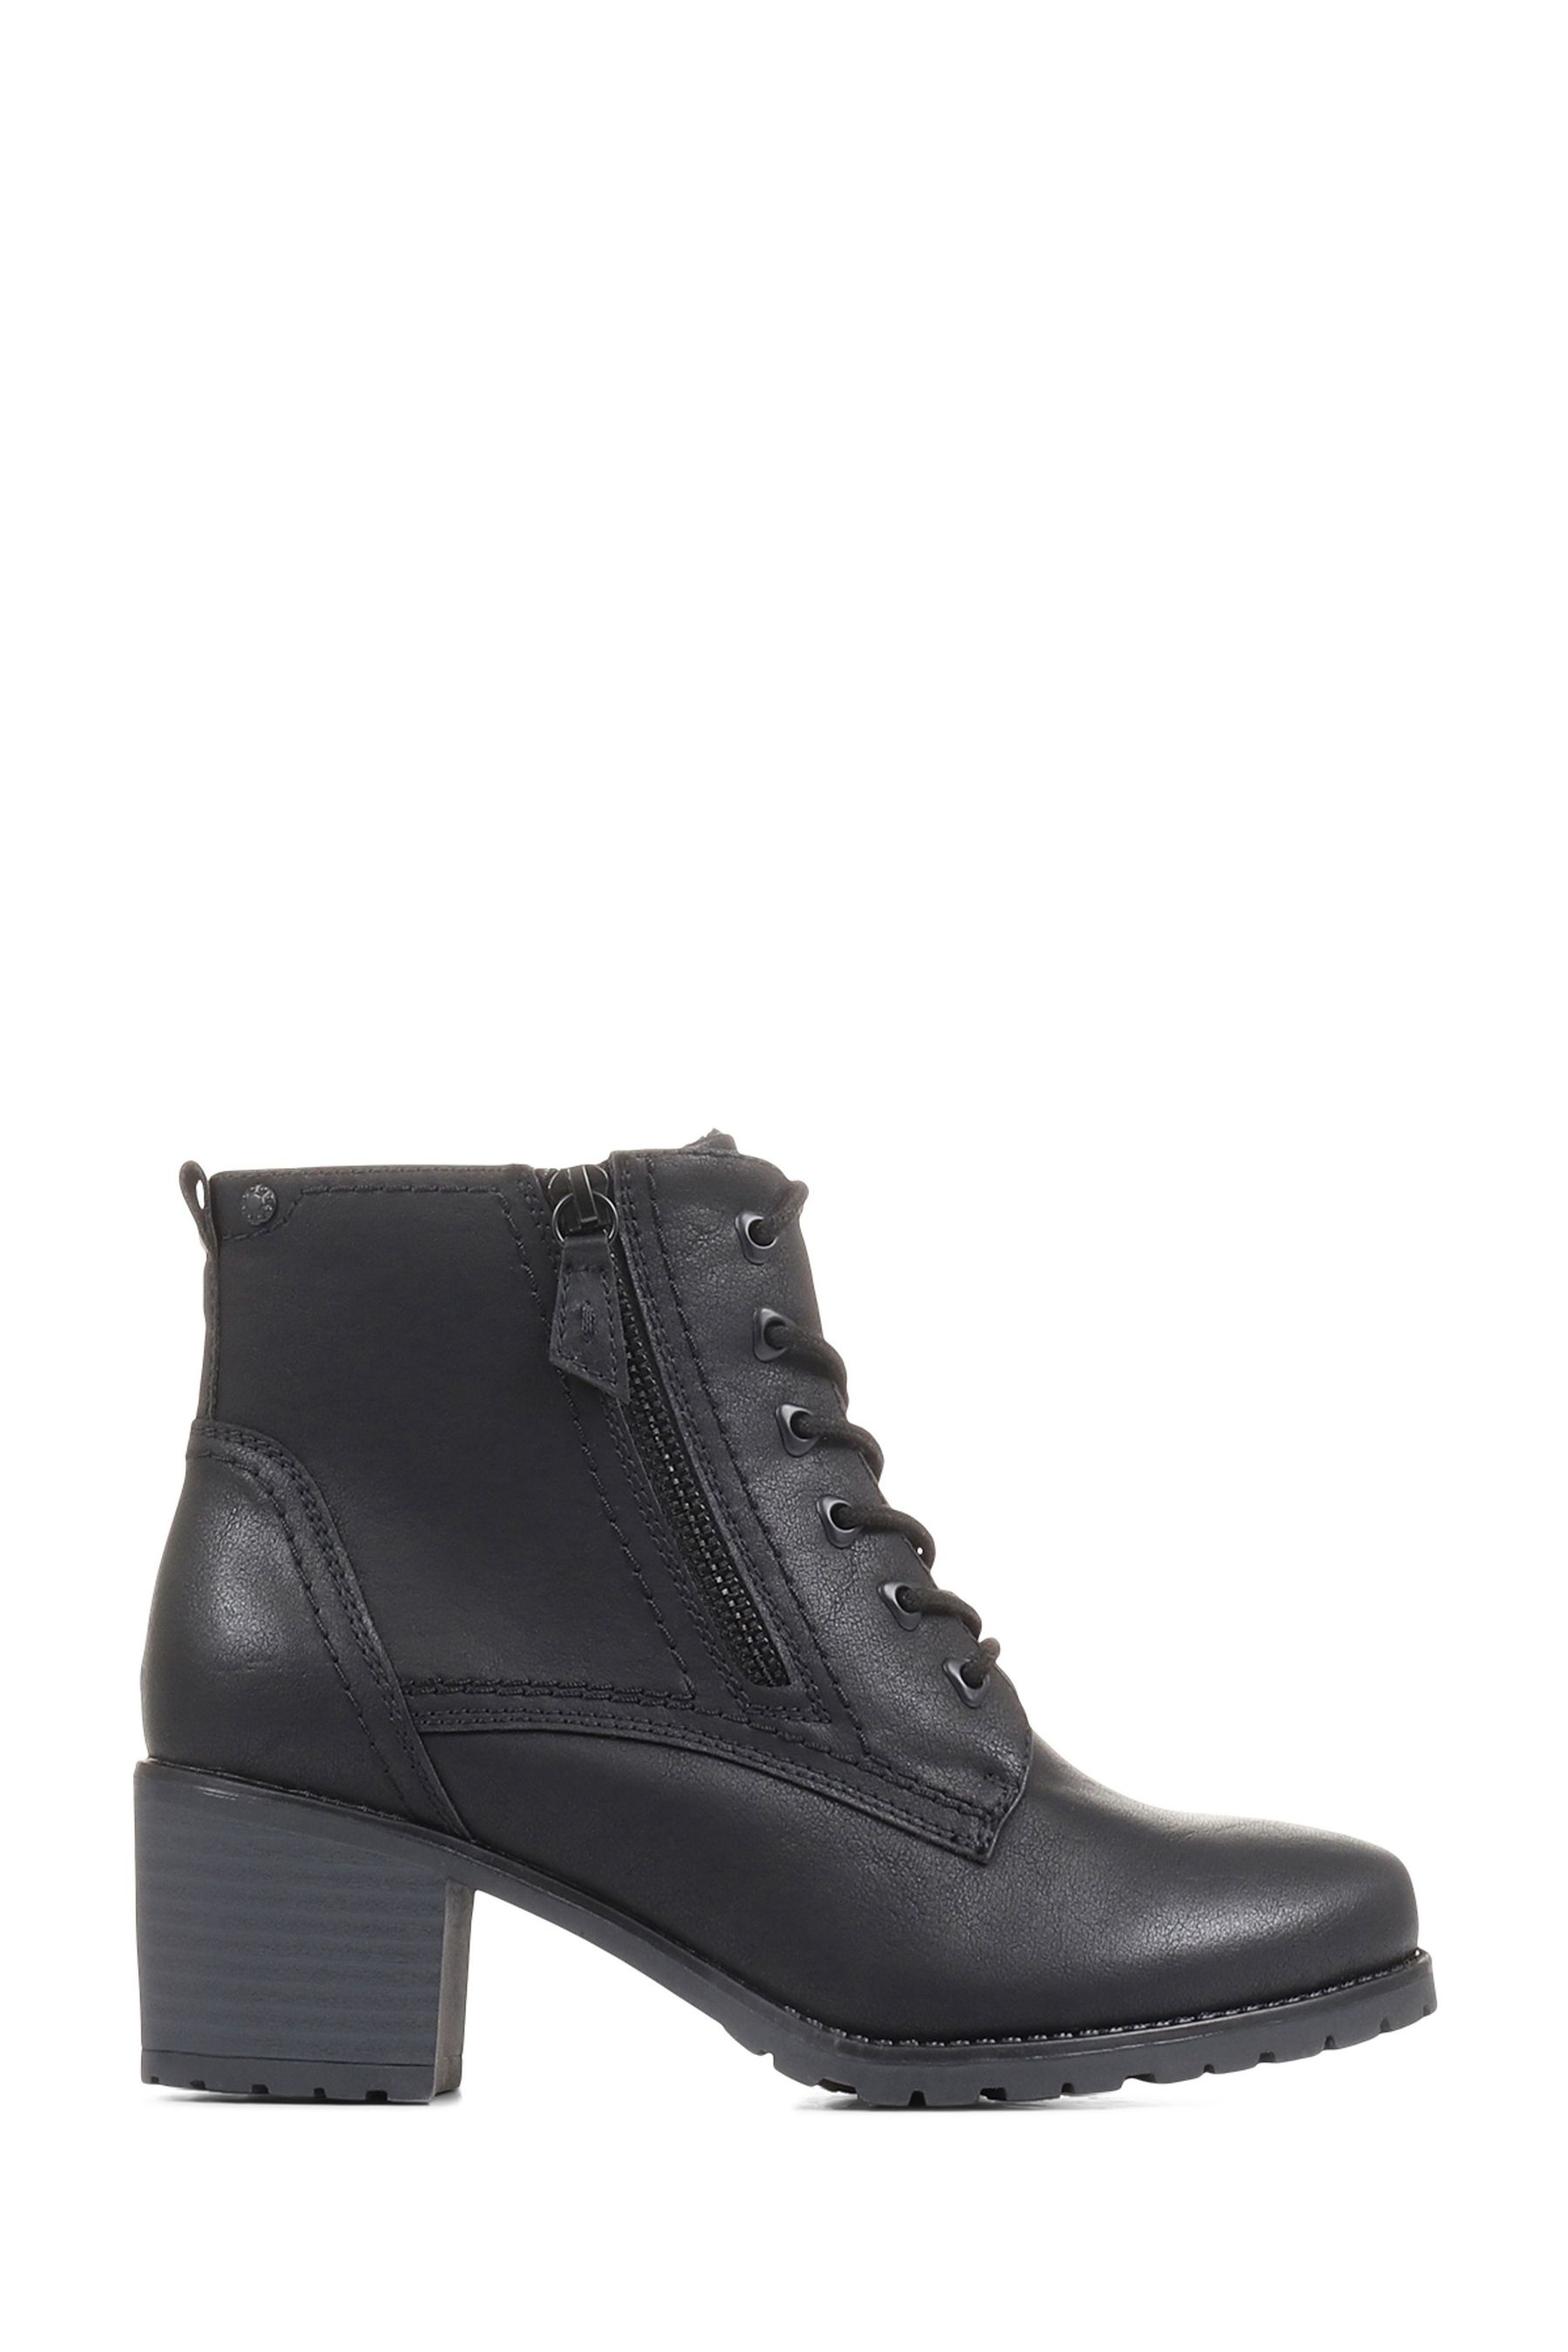 Buy Pavers Ladies Black Ankle Boots from the Next UK online shop